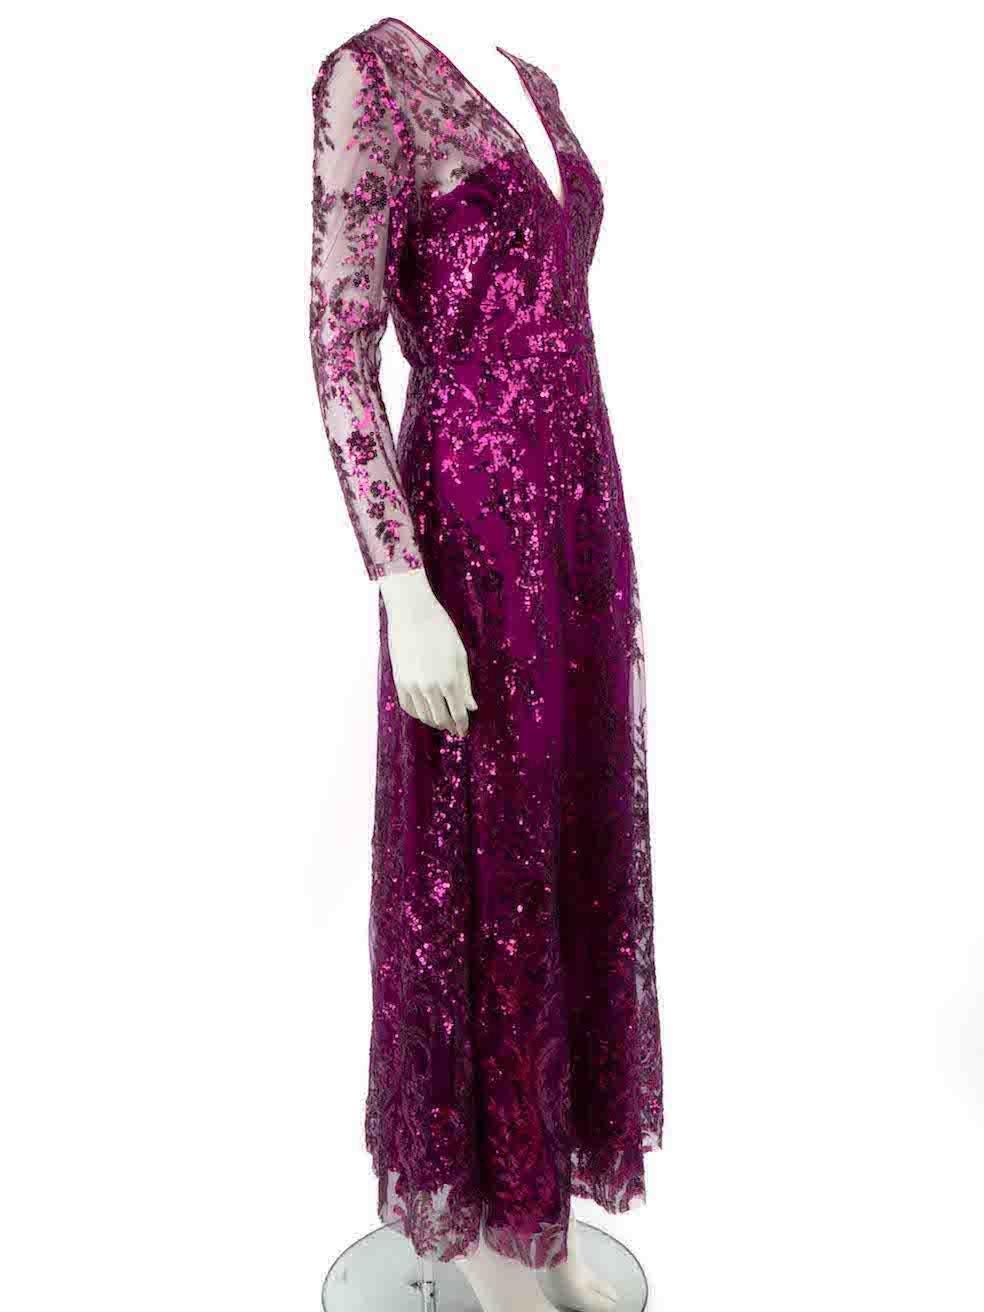 CONDITION is Very good. Minimal wear to dress is evident. Minimal wear to the lining with plucks to the weave of the silk at the front and back on this used Naeem Khan designer resale item.
 
 Details
 Purple
 Nylon tulle
 Gown
 Long sleeves
